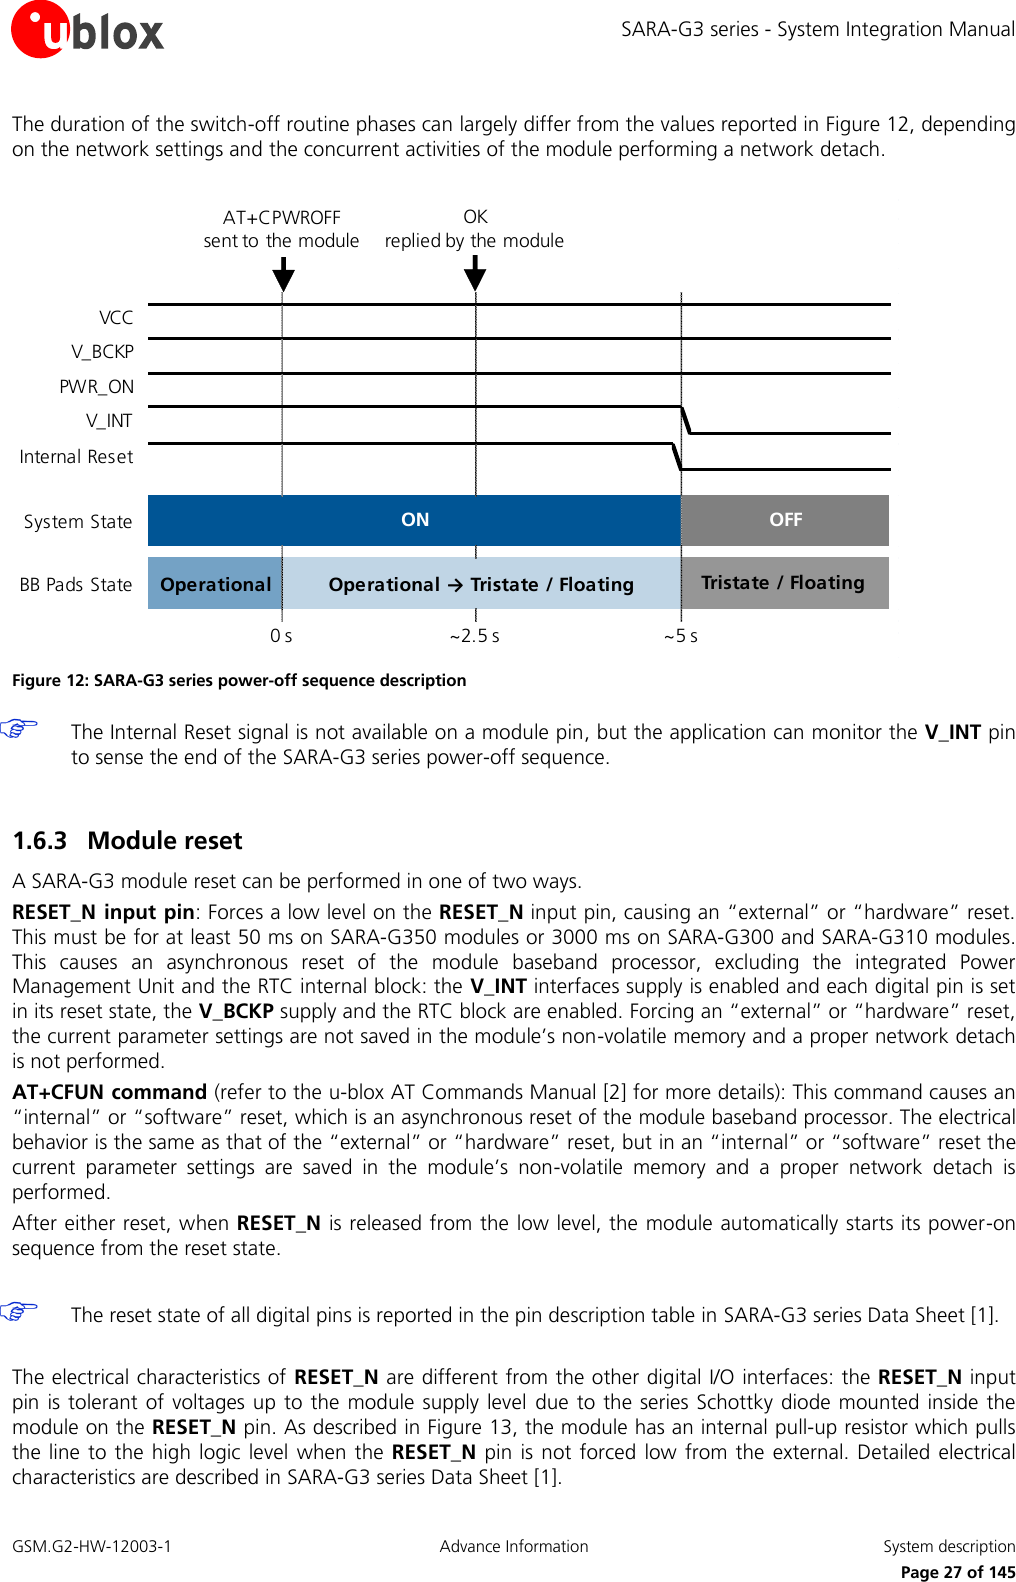 SARA-G3 series - System Integration Manual GSM.G2-HW-12003-1  Advance Information  System description     Page 27 of 145 The duration of the switch-off routine phases can largely differ from the values reported in Figure 12, depending on the network settings and the concurrent activities of the module performing a network detach.  VCCV_BCKPPWR_ONV_INTInternal ResetSystem StateBB Pads State OperationalOFFTristate / Floating ONOperational → Tristate / FloatingAT+CPWROFFsent to the module0 s~2.5 s~5 sOKreplied by the module Figure 12: SARA-G3 series power-off sequence description   The Internal Reset signal is not available on a module pin, but the application can monitor the V_INT pin to sense the end of the SARA-G3 series power-off sequence.  1.6.3 Module reset A SARA-G3 module reset can be performed in one of two ways. RESET_N input pin: Forces a low level on the RESET_N input pin, causing an “external” or “hardware” reset. This must be for at least 50 ms on SARA-G350 modules or 3000 ms on SARA-G300 and SARA-G310 modules. This  causes  an  asynchronous  reset  of  the  module  baseband  processor,  excluding  the  integrated  Power Management Unit and the RTC internal block: the V_INT interfaces supply is enabled and each digital pin is set in its reset state, the V_BCKP supply and the RTC block are enabled. Forcing an “external” or “hardware” reset, the current parameter settings are not saved in the module’s non-volatile memory and a proper network detach is not performed. AT+CFUN command (refer to the u-blox AT Commands Manual [2] for more details): This command causes an “internal” or “software” reset, which is an asynchronous reset of the module baseband processor. The electrical behavior is the same as that of the “external” or “hardware” reset, but in an “internal” or “software” reset the current  parameter  settings  are  saved  in  the  module’s  non-volatile  memory  and  a  proper  network  detach  is performed. After either reset, when RESET_N is released from the low level, the module automatically starts its power-on sequence from the reset state.   The reset state of all digital pins is reported in the pin description table in SARA-G3 series Data Sheet [1].  The electrical characteristics of RESET_N are different from the other digital I/O interfaces: the RESET_N input pin is tolerant  of  voltages up to the  module supply level due to the  series  Schottky diode  mounted inside  the module on the RESET_N pin. As described in Figure 13, the module has an internal pull-up resistor which pulls the line to the high  logic level  when the  RESET_N  pin  is  not forced low  from the  external. Detailed  electrical characteristics are described in SARA-G3 series Data Sheet [1]. 